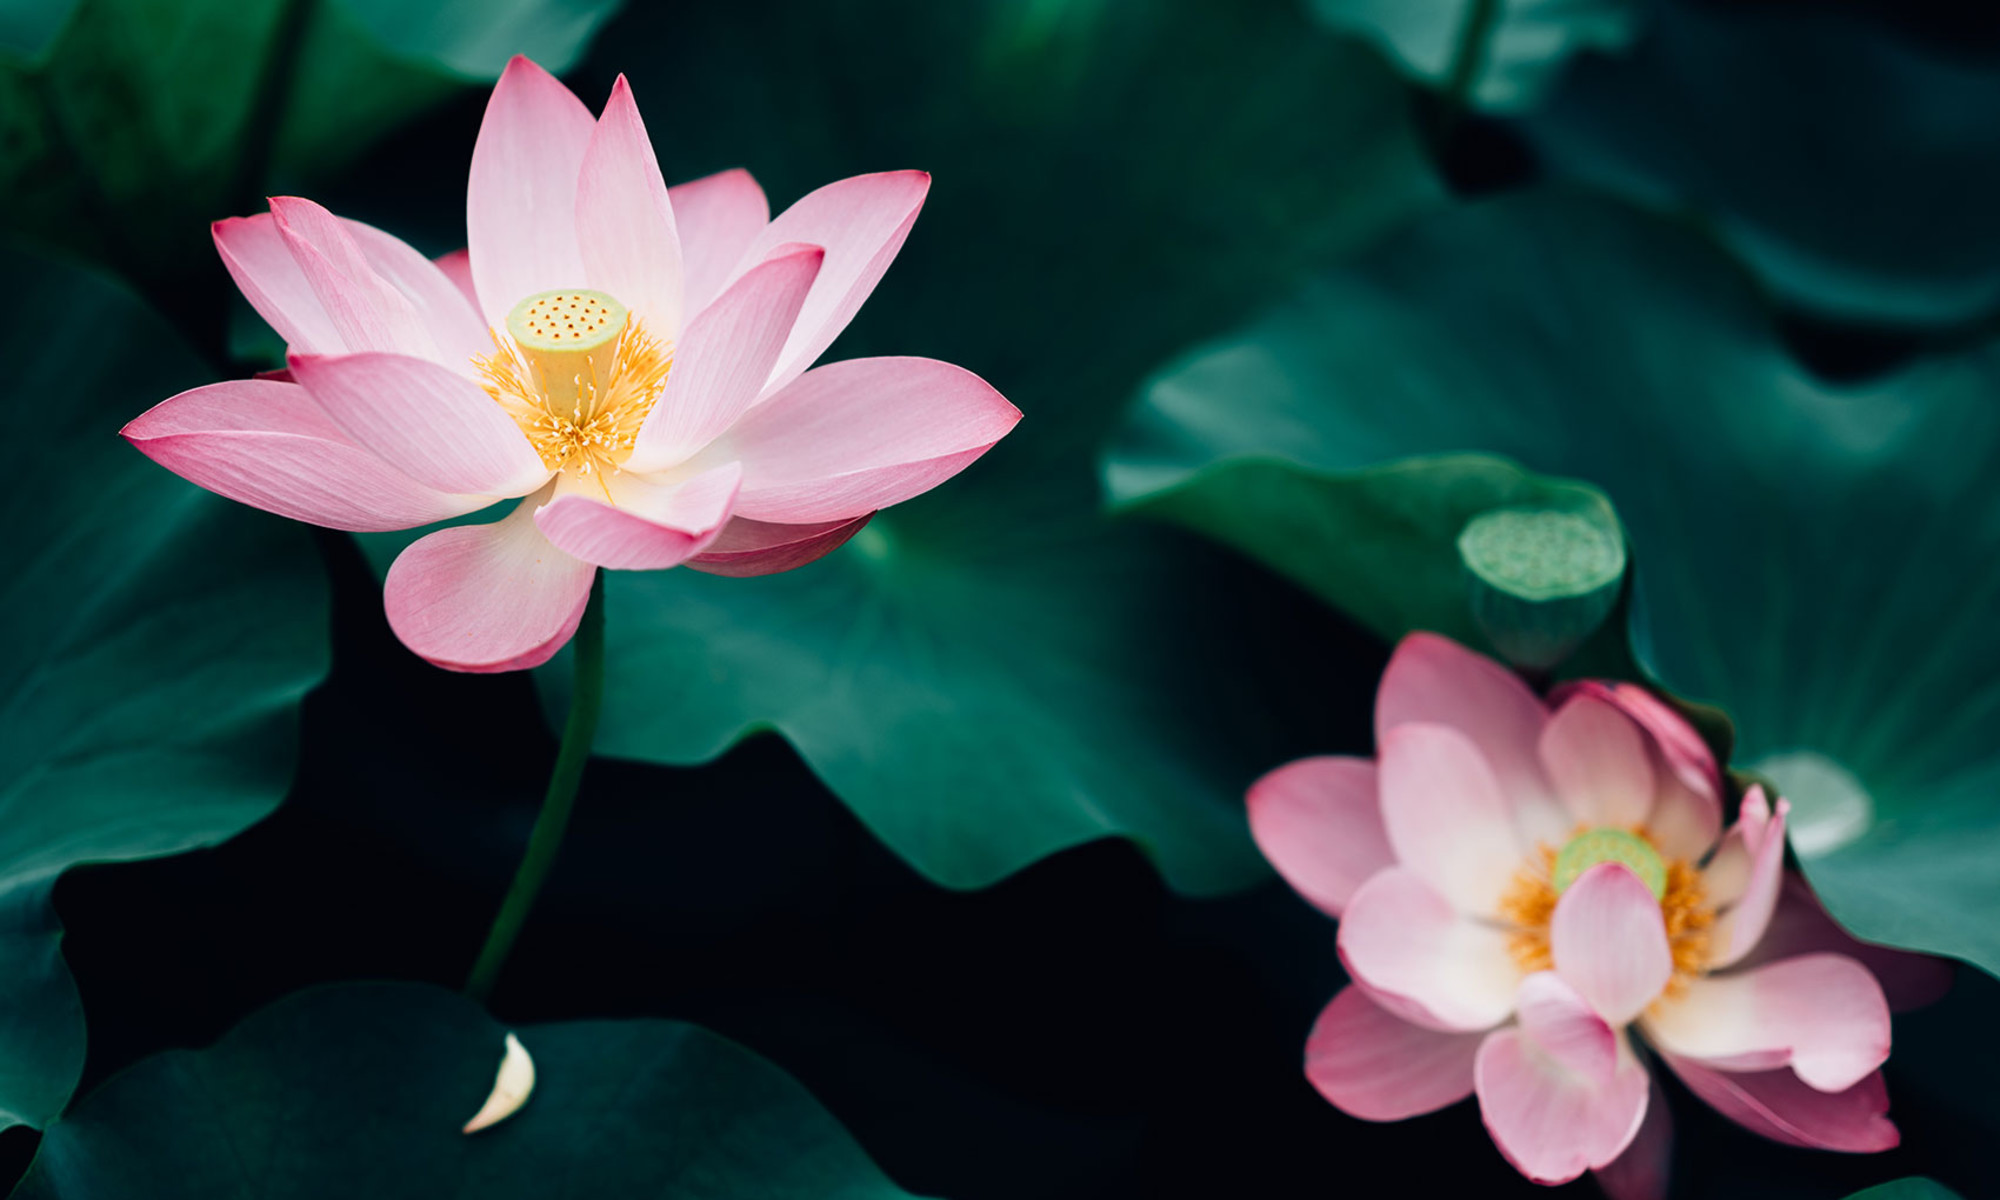 Lotus Flowers: The History, Symbolism & Meaning Of This Flower ...